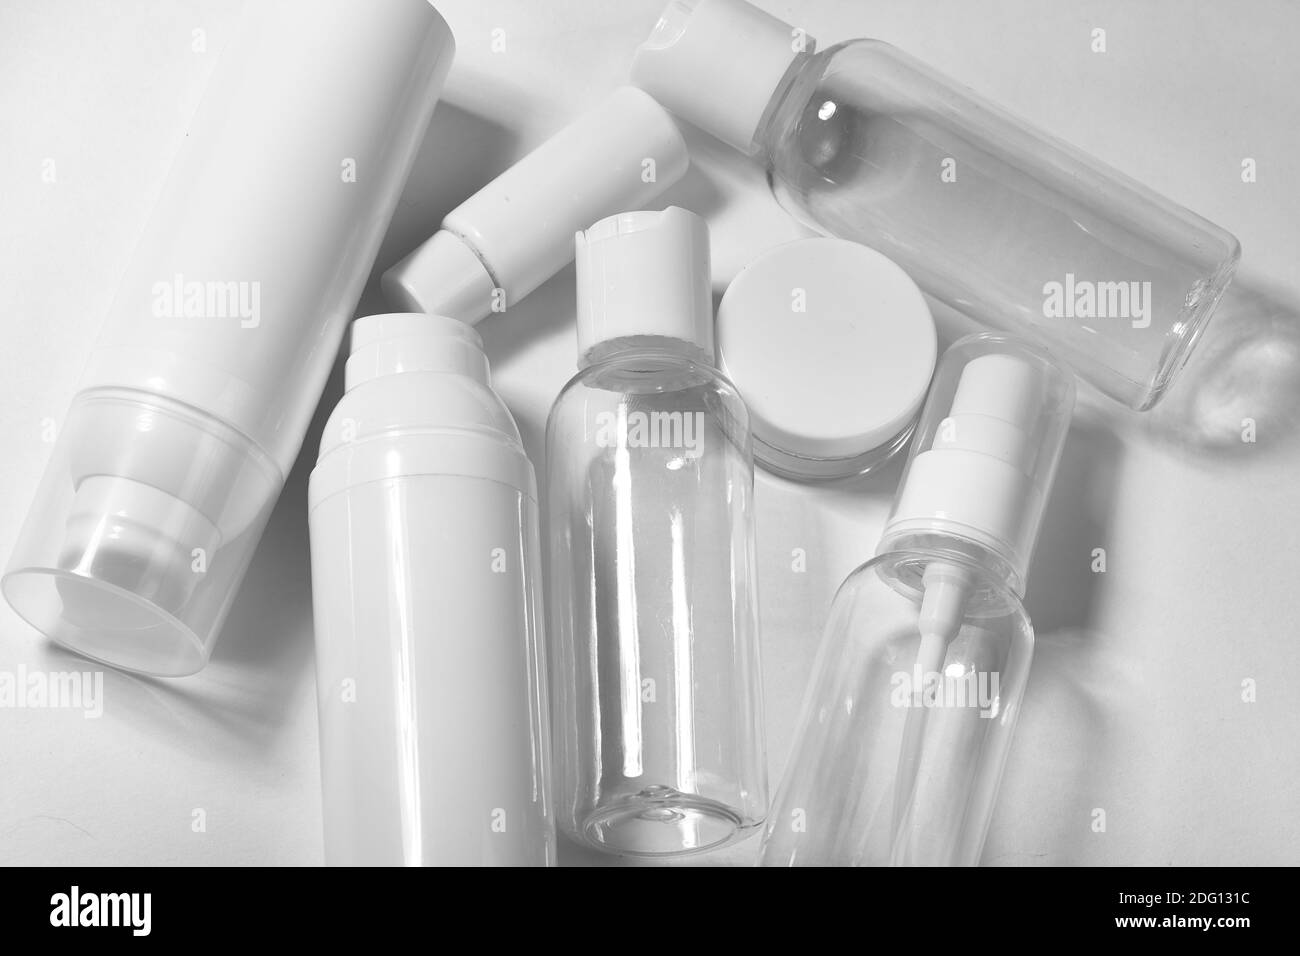 White cosmetic bottles on white background. Wellness, spa and body care bottles collection. Beauty treatment, bathroom set Stock Photo